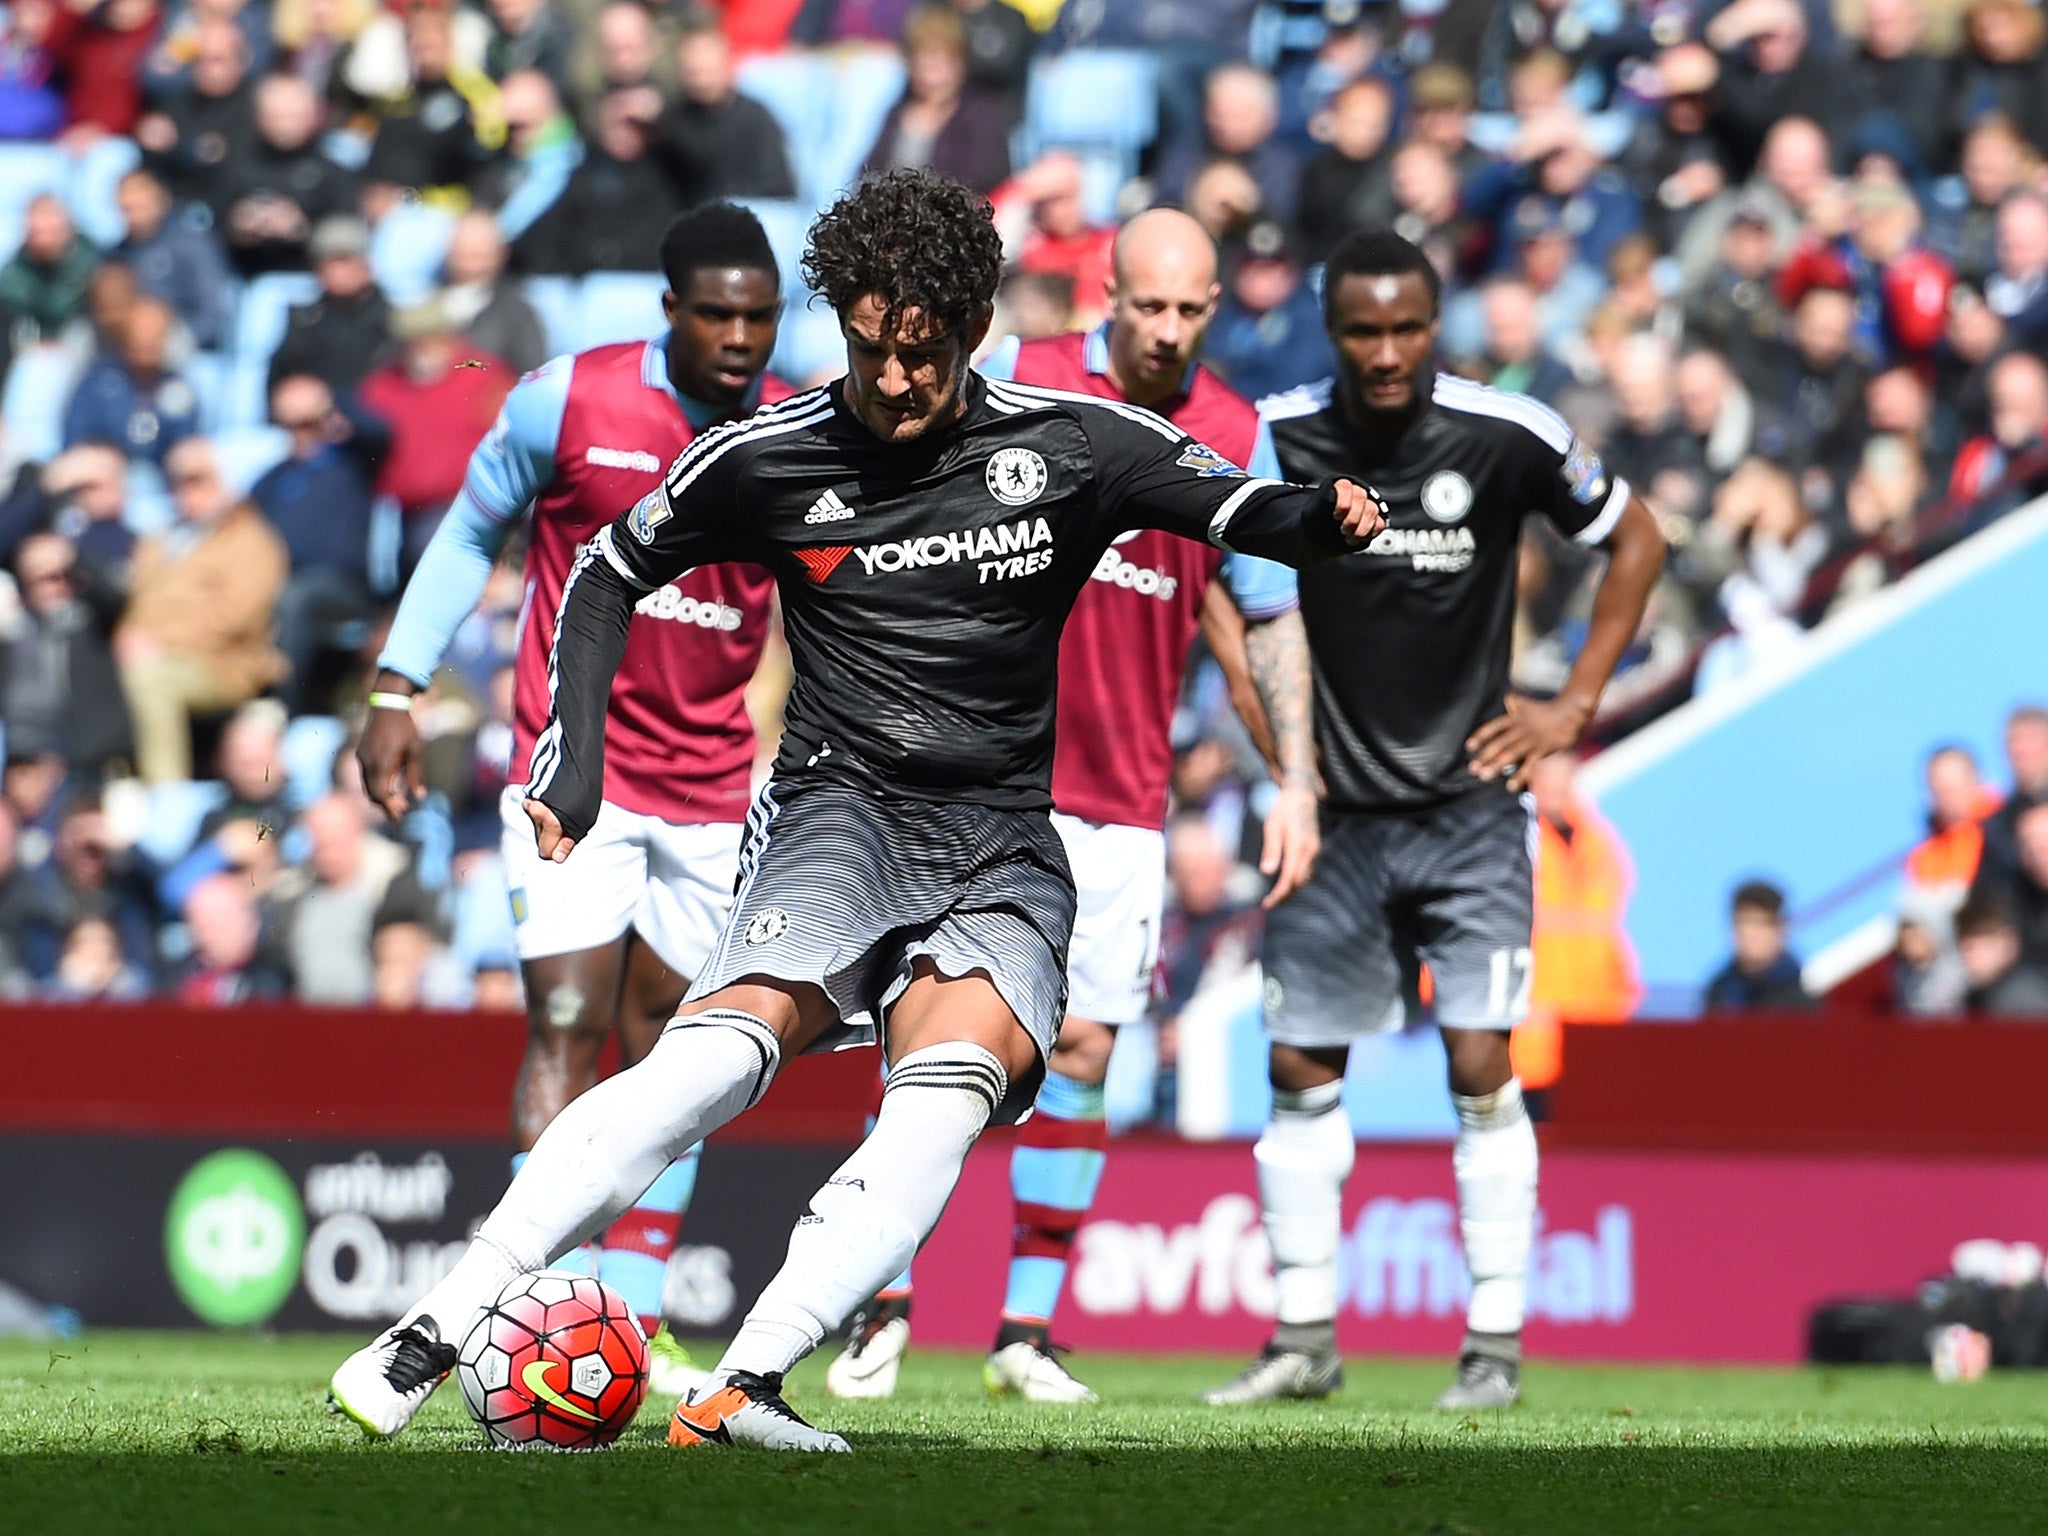 Alexandre Pato scores from the penalty spot to net his first goal for Chelsea